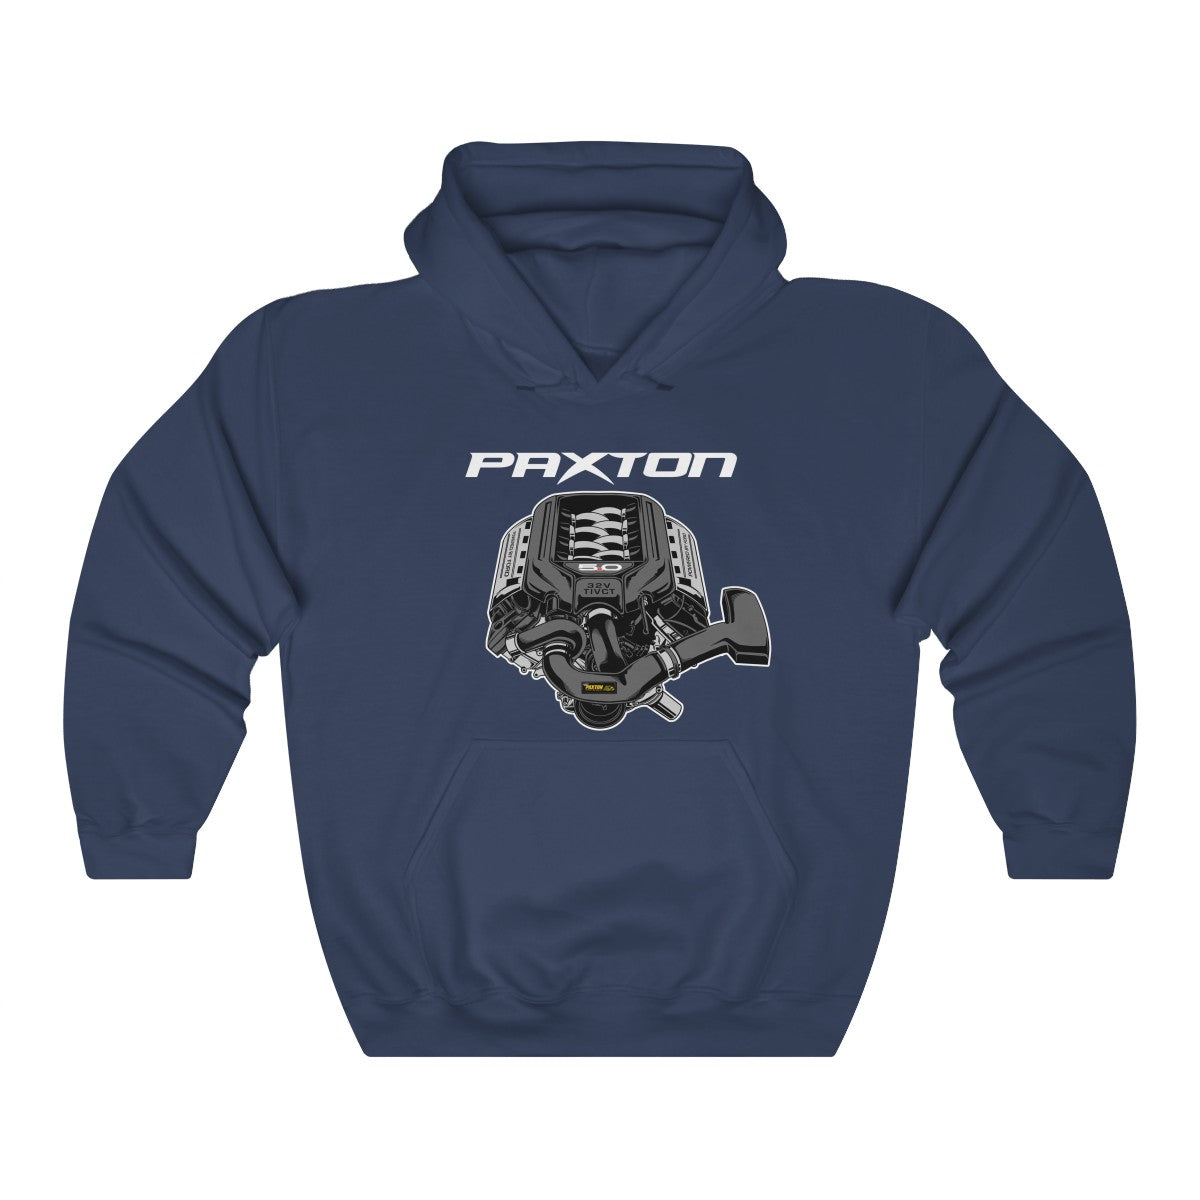 s197 Paxton Pull Over Hoodie - 5ohNation